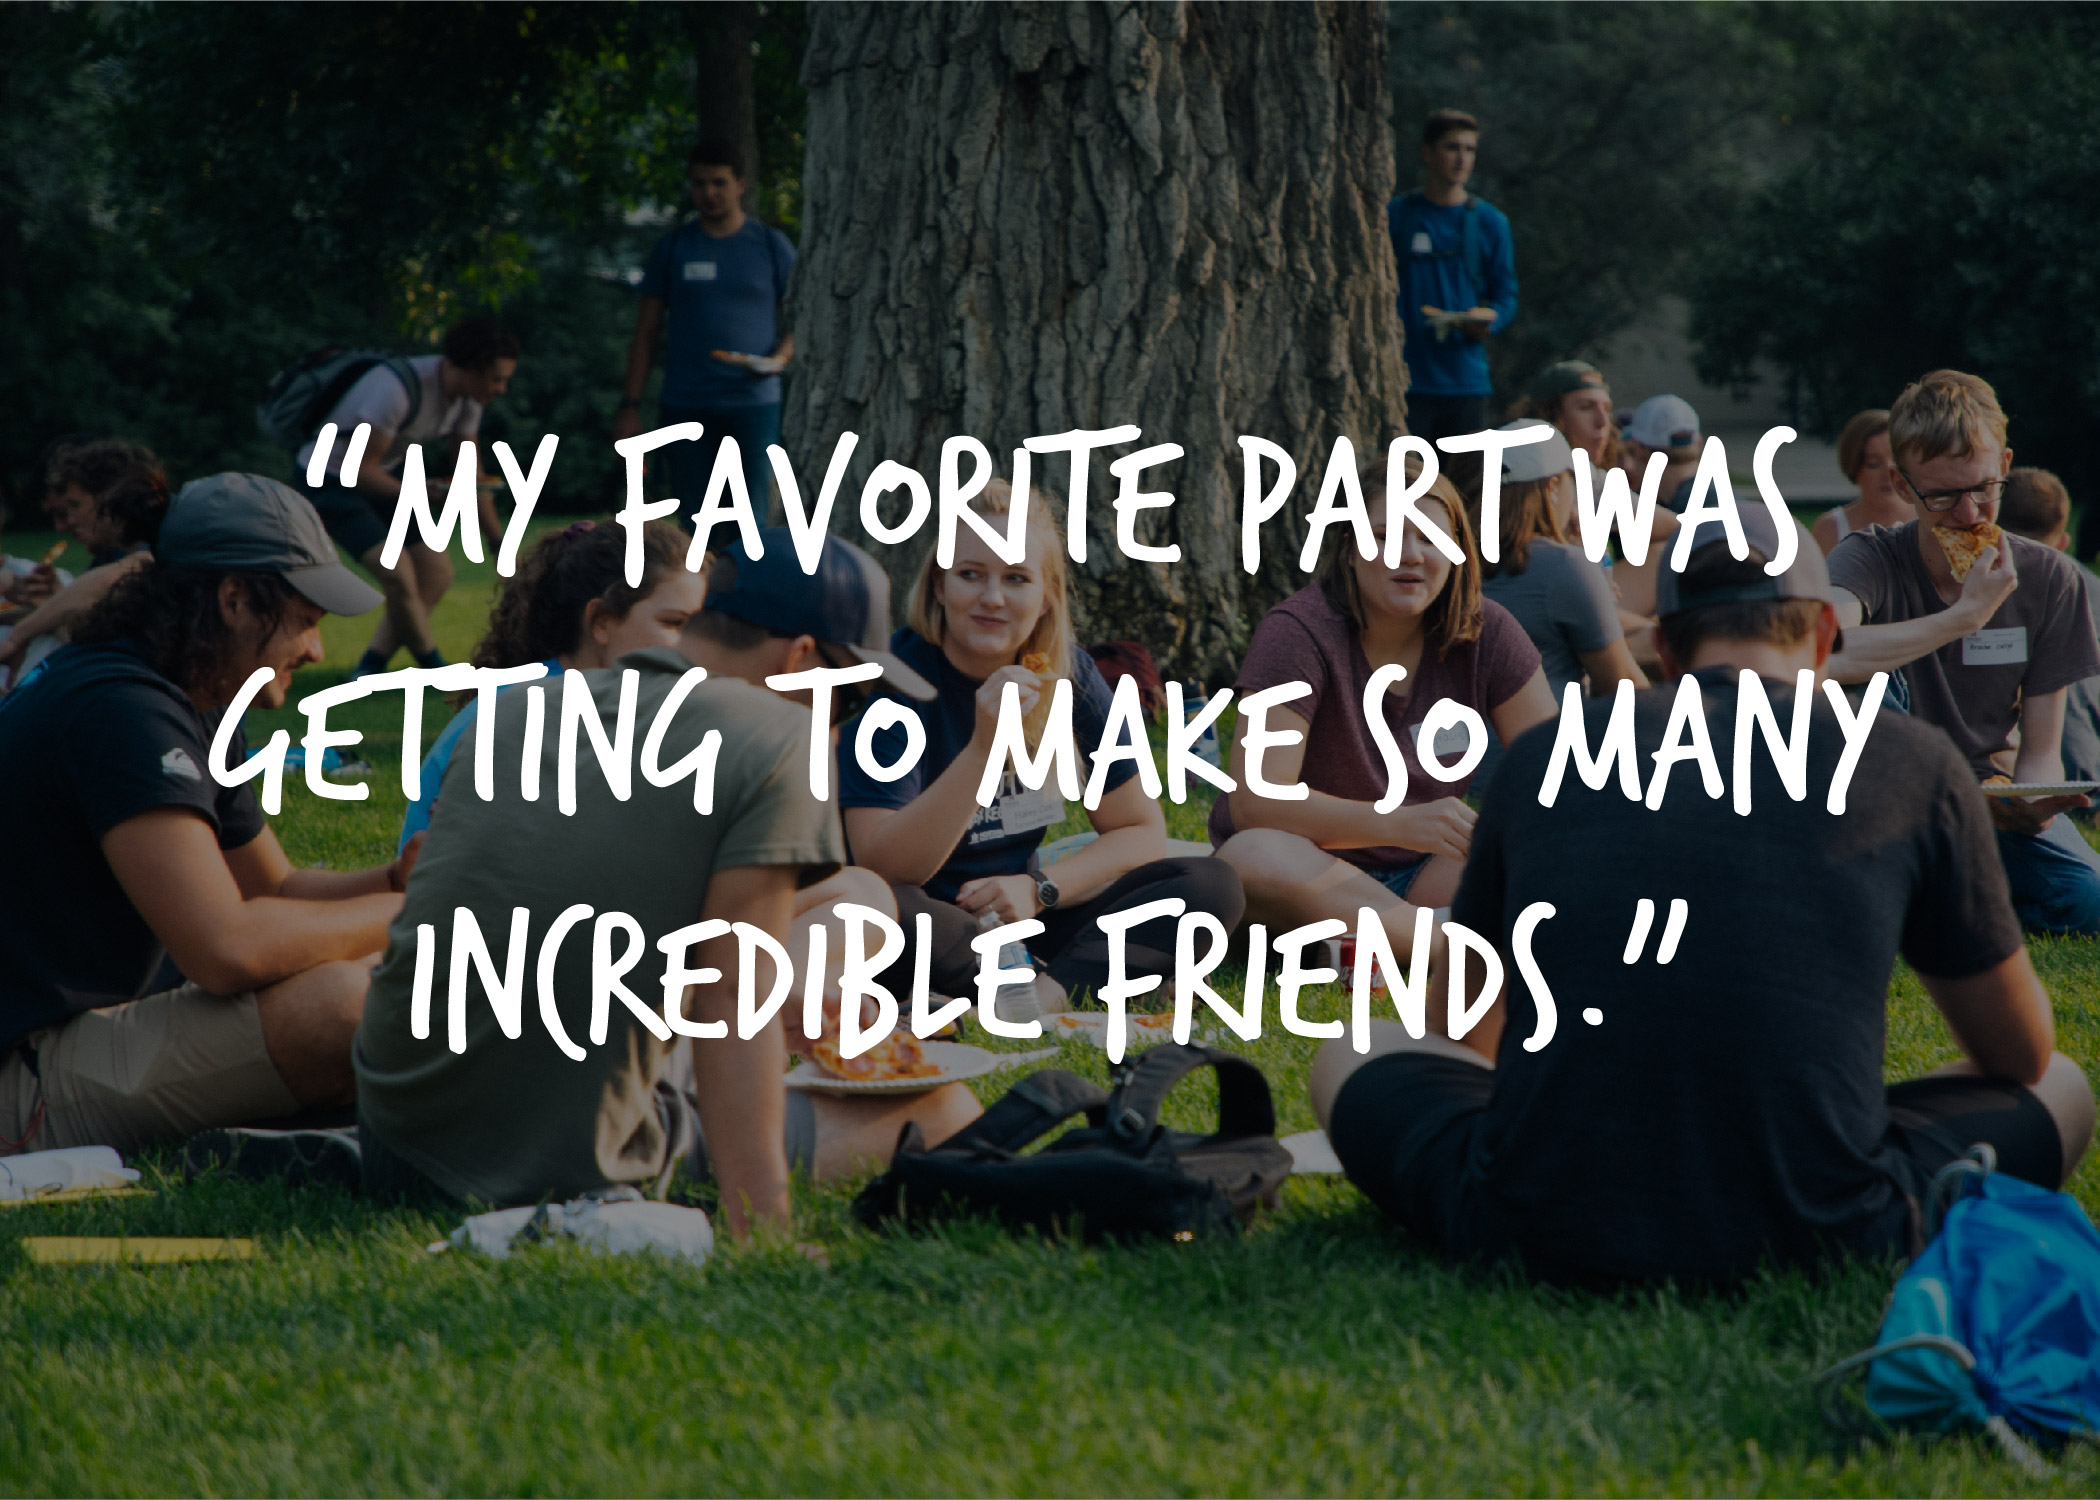 Students in circle- quote "My Favorite Part was getting to make so man incredible friends."